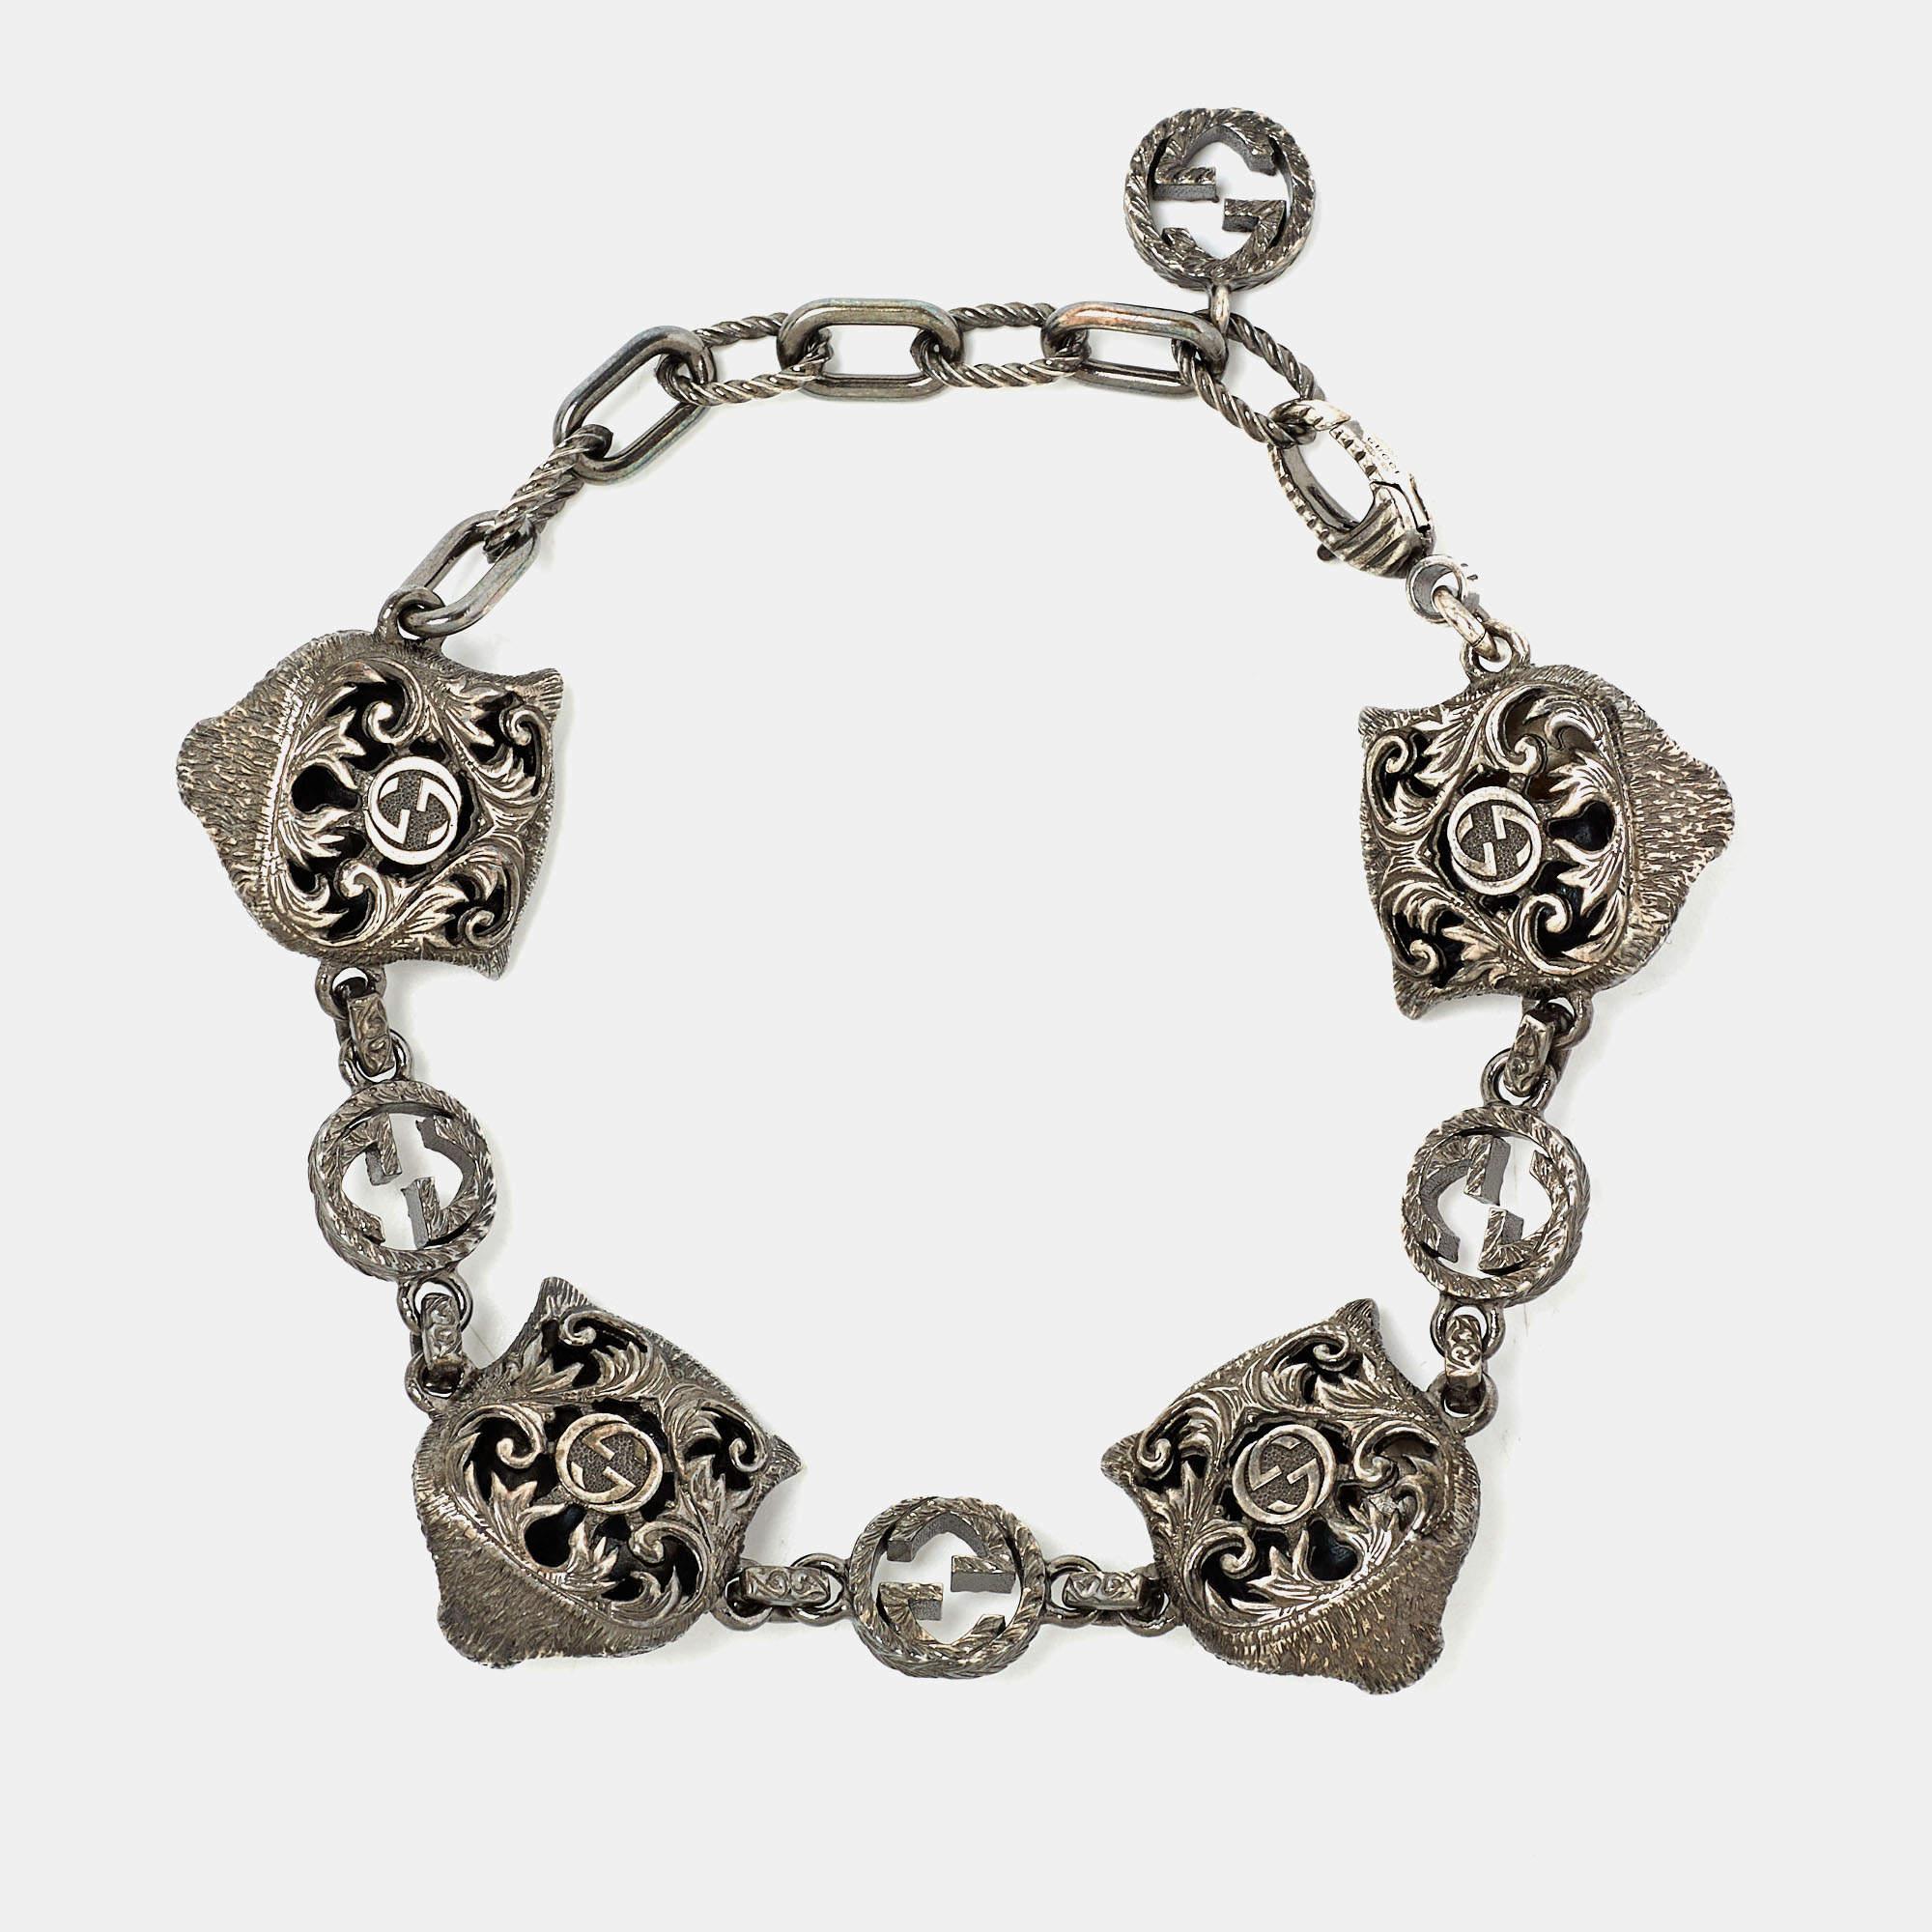 Be it to your dinner outfit or summer dress, this Gucci bracelet will surely add a statement touch. It is crafted from silver and added with feline head charms and the GG logo.

Includes: Original Dustbag, Original Box,
